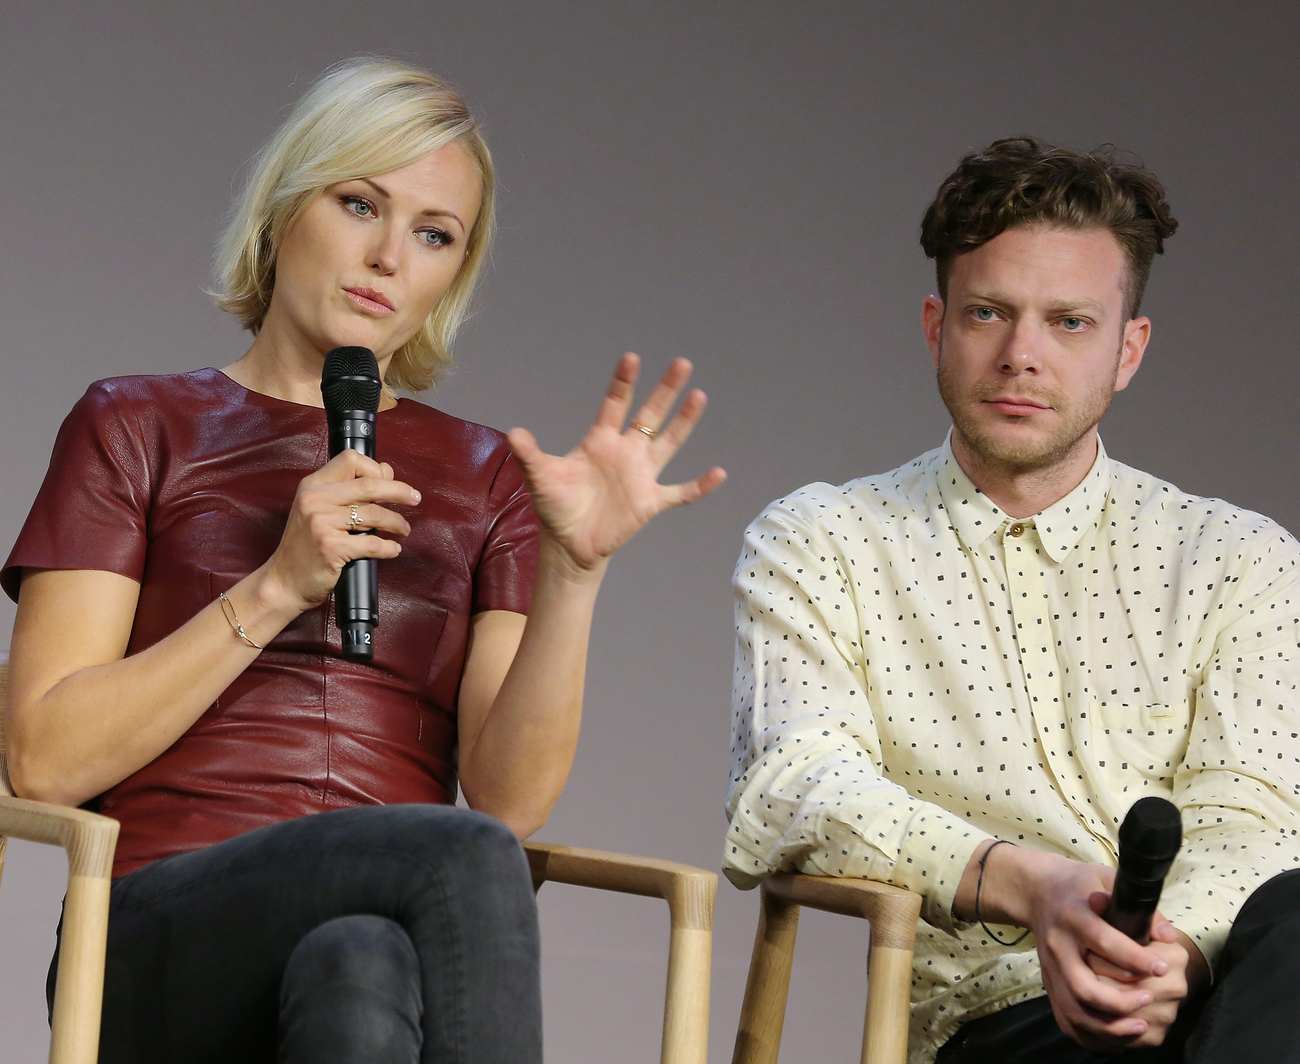 Malin Akerman discusses the film The Final Girls